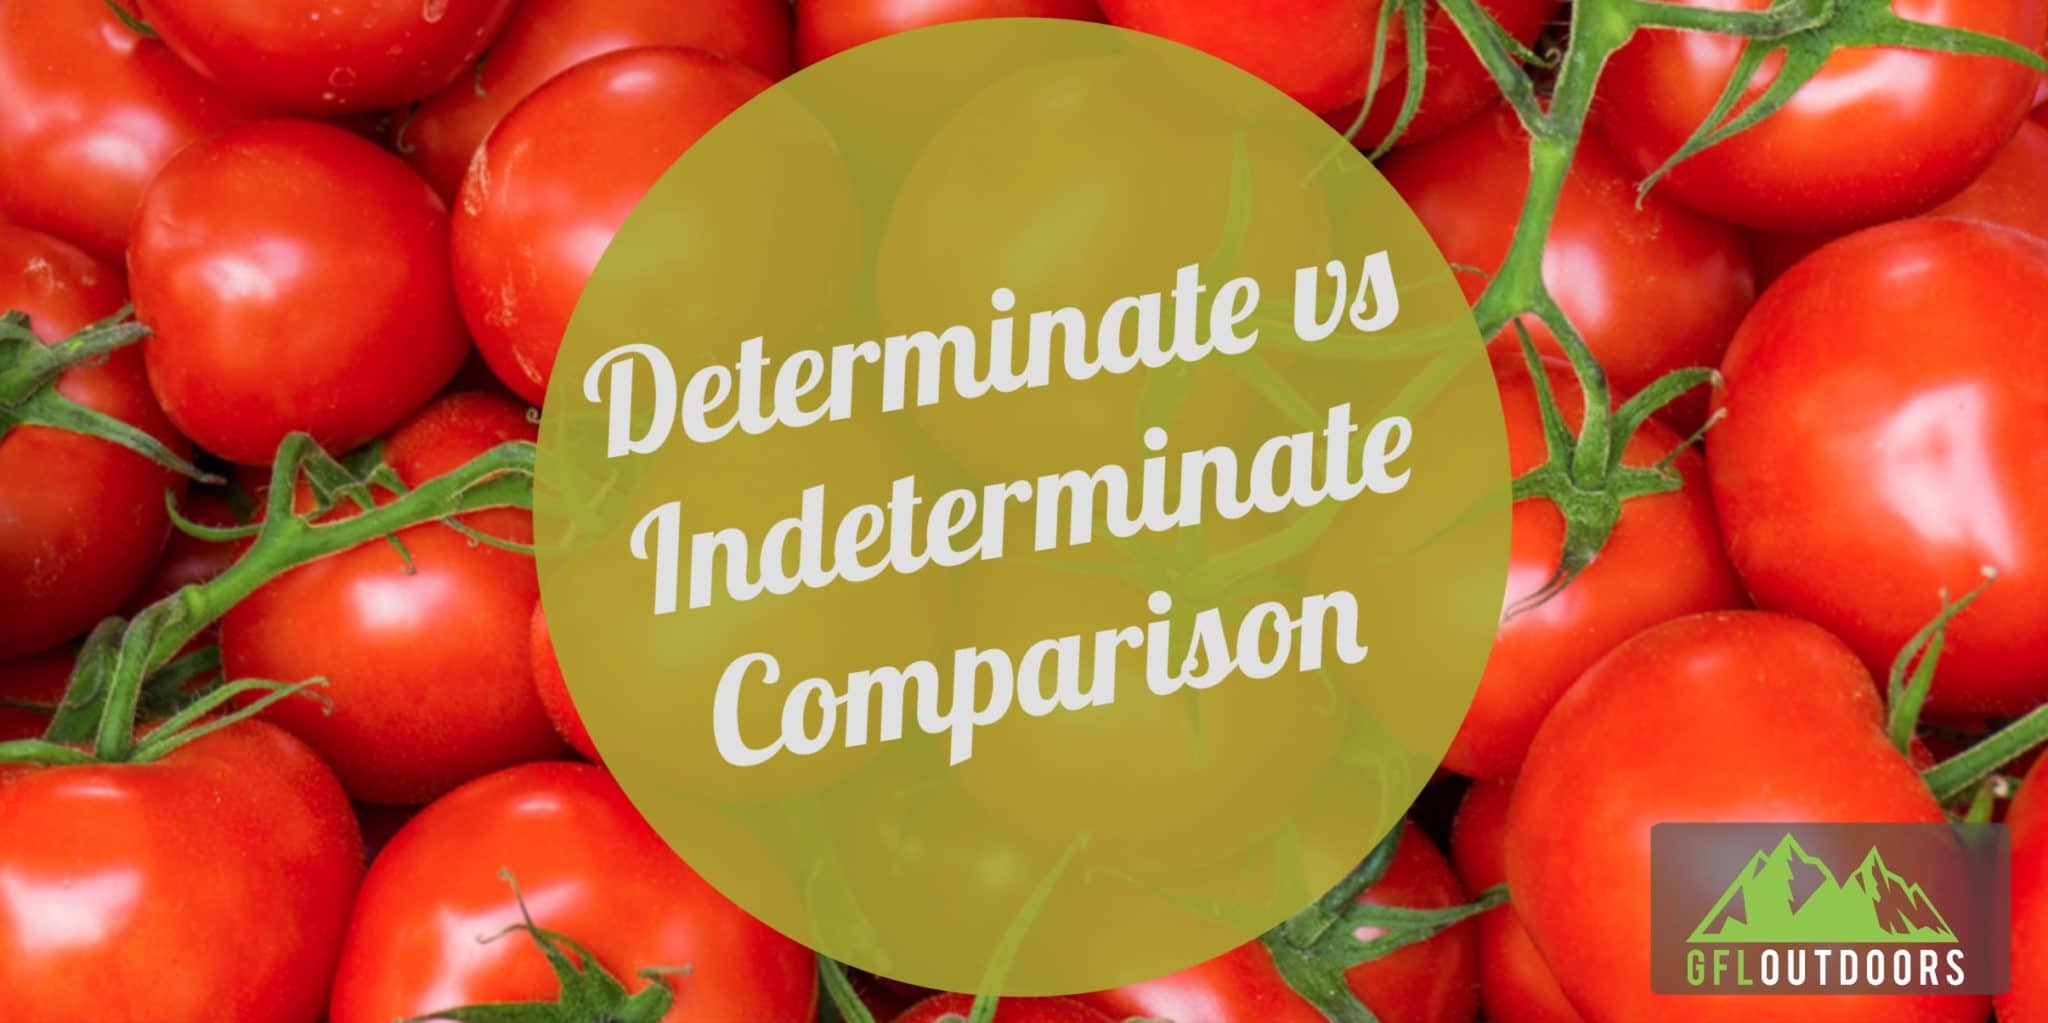 A Guide to Determinate vs Indeterminate Tomatoes - GFL Outdoors